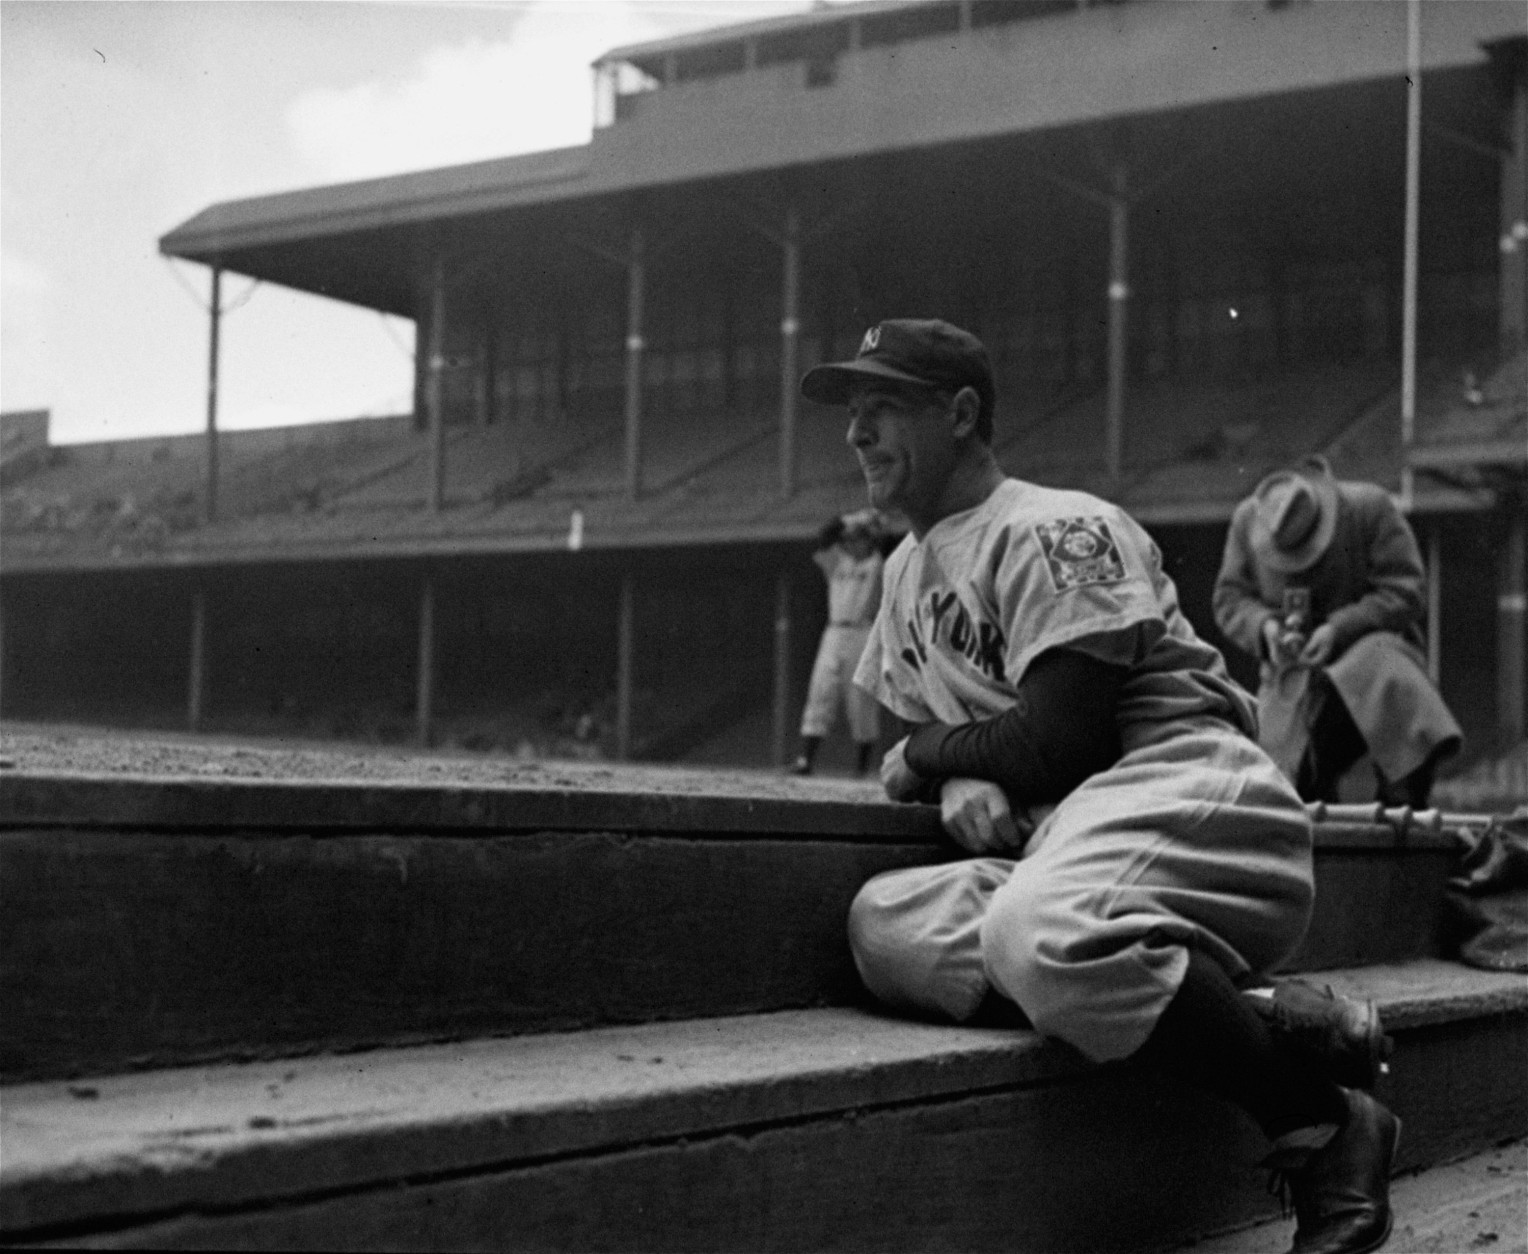 Lou Gehrig, New York Yankees first baseman who had played in 2,130 consecutive games, took to the bench May 2, 1939 at his own request and looked on forlornly as his teammates warmed up for their game with the Tigers in Detroit.  "I felt I wasn't helping the club by the way I was playing," Gehrig explained.  The Yankees thrashed the Tigers 22 to 2.  (AP Photo)